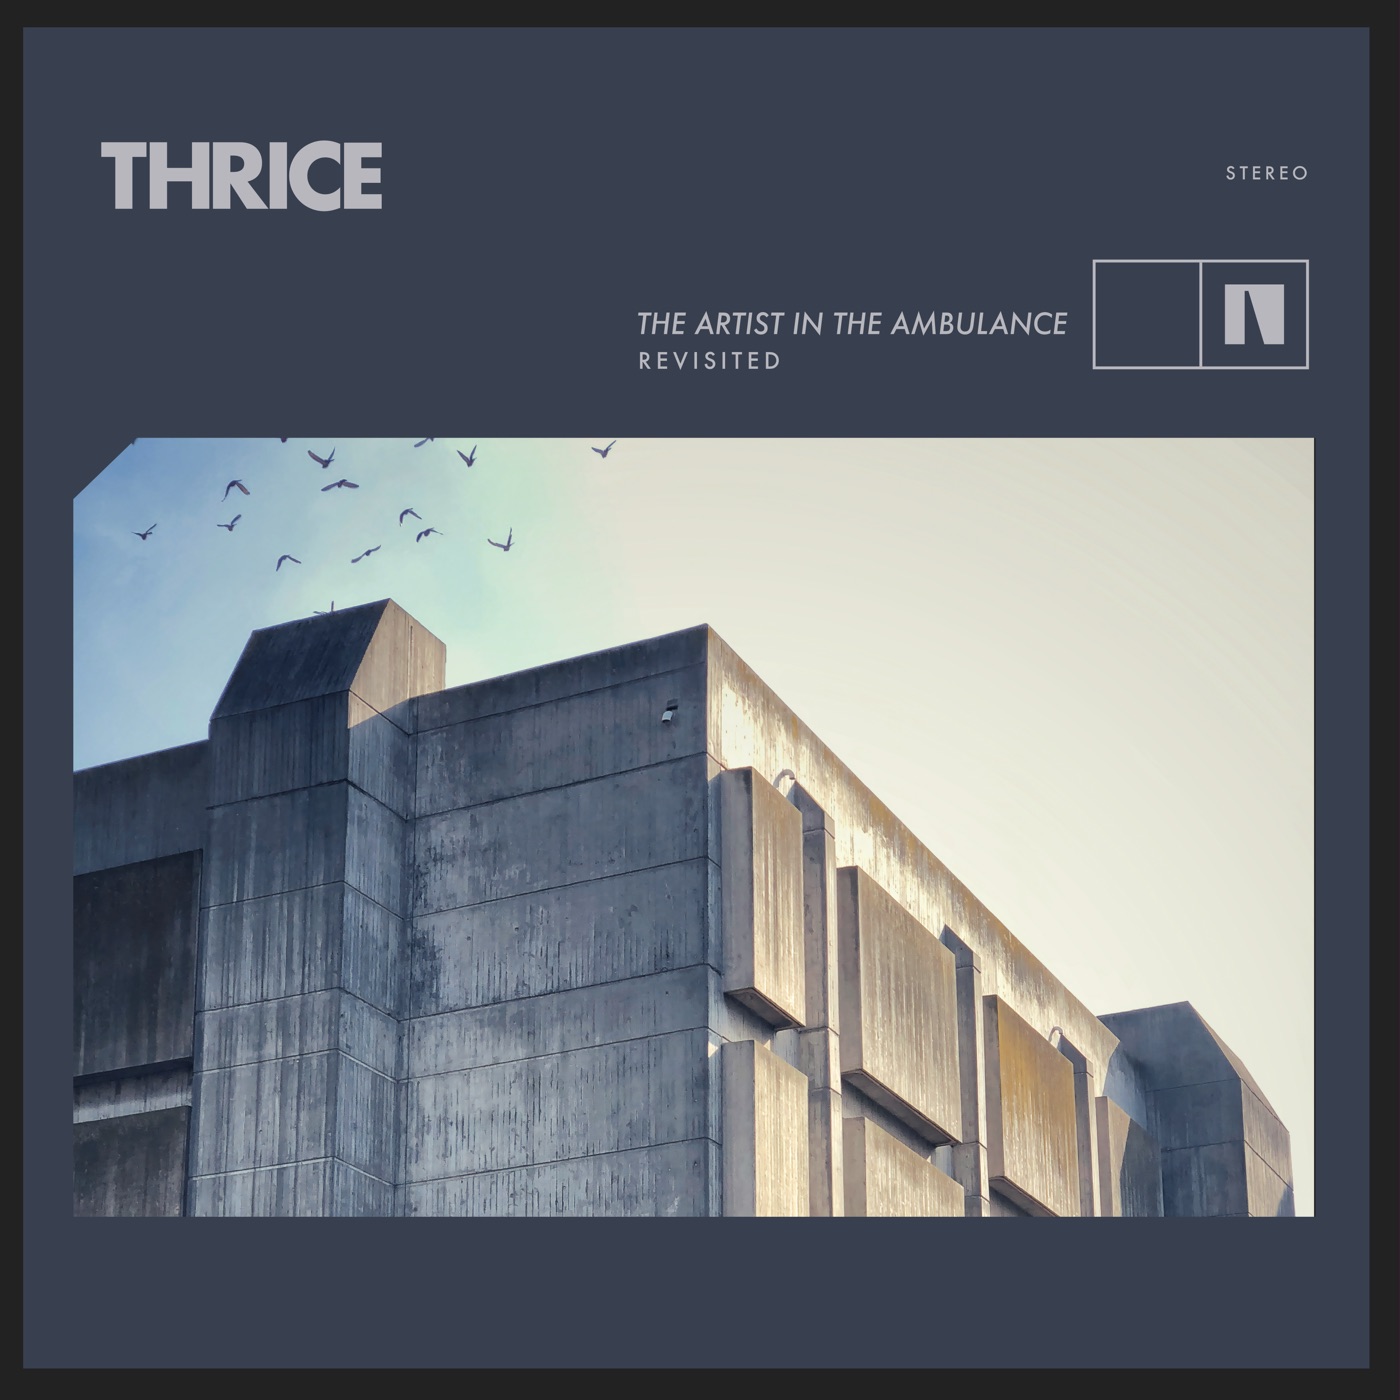 The Artist in the Ambulance - Revisited by Thrice